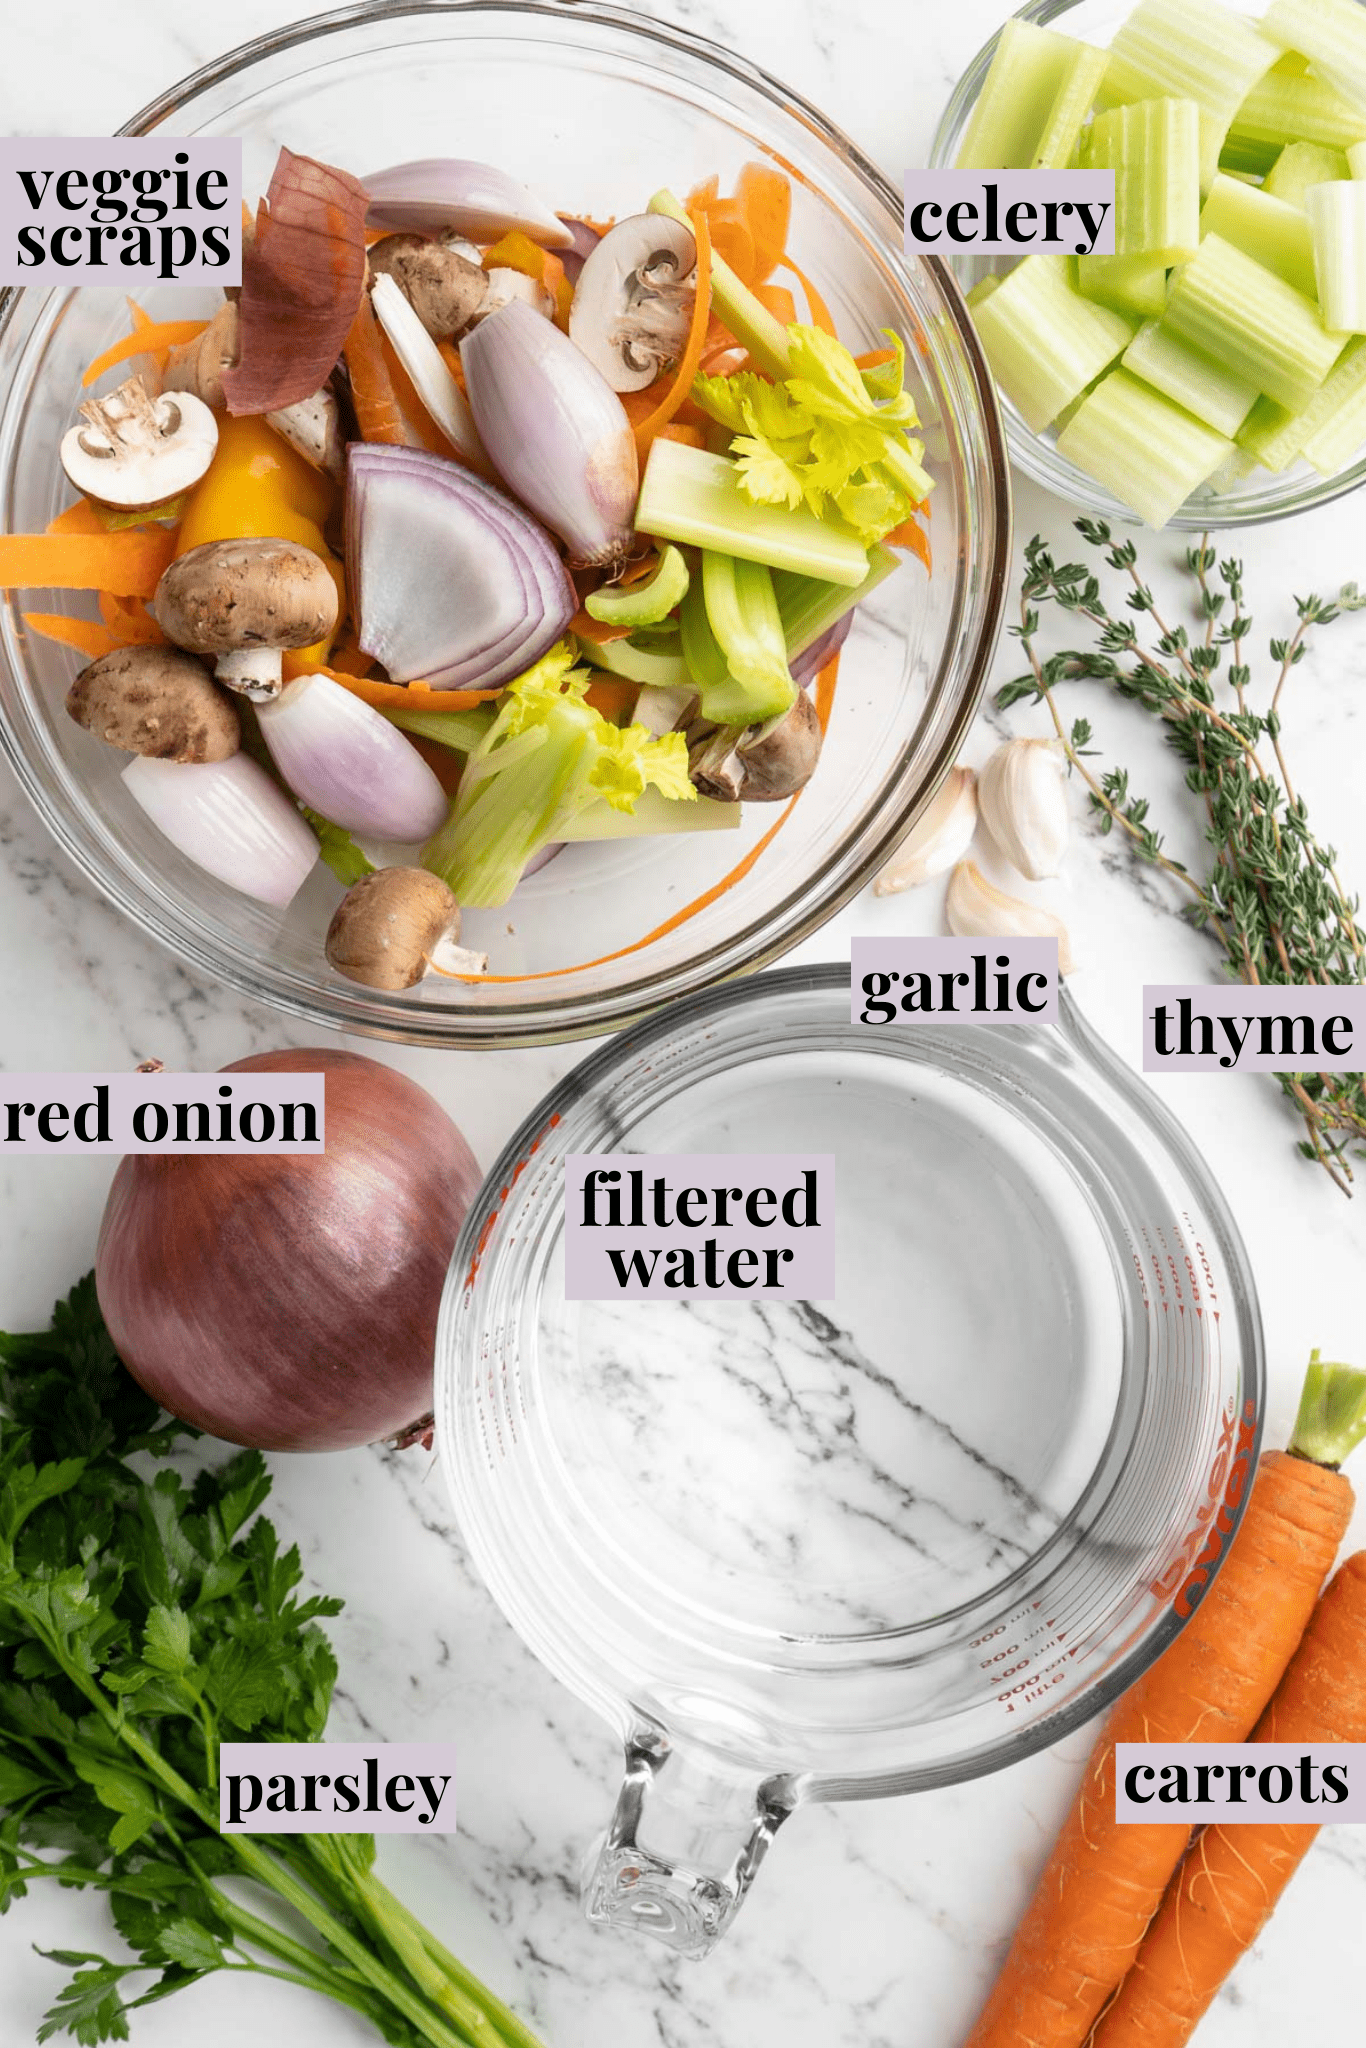 Overhead view of ingredients for vegetable broth with labels